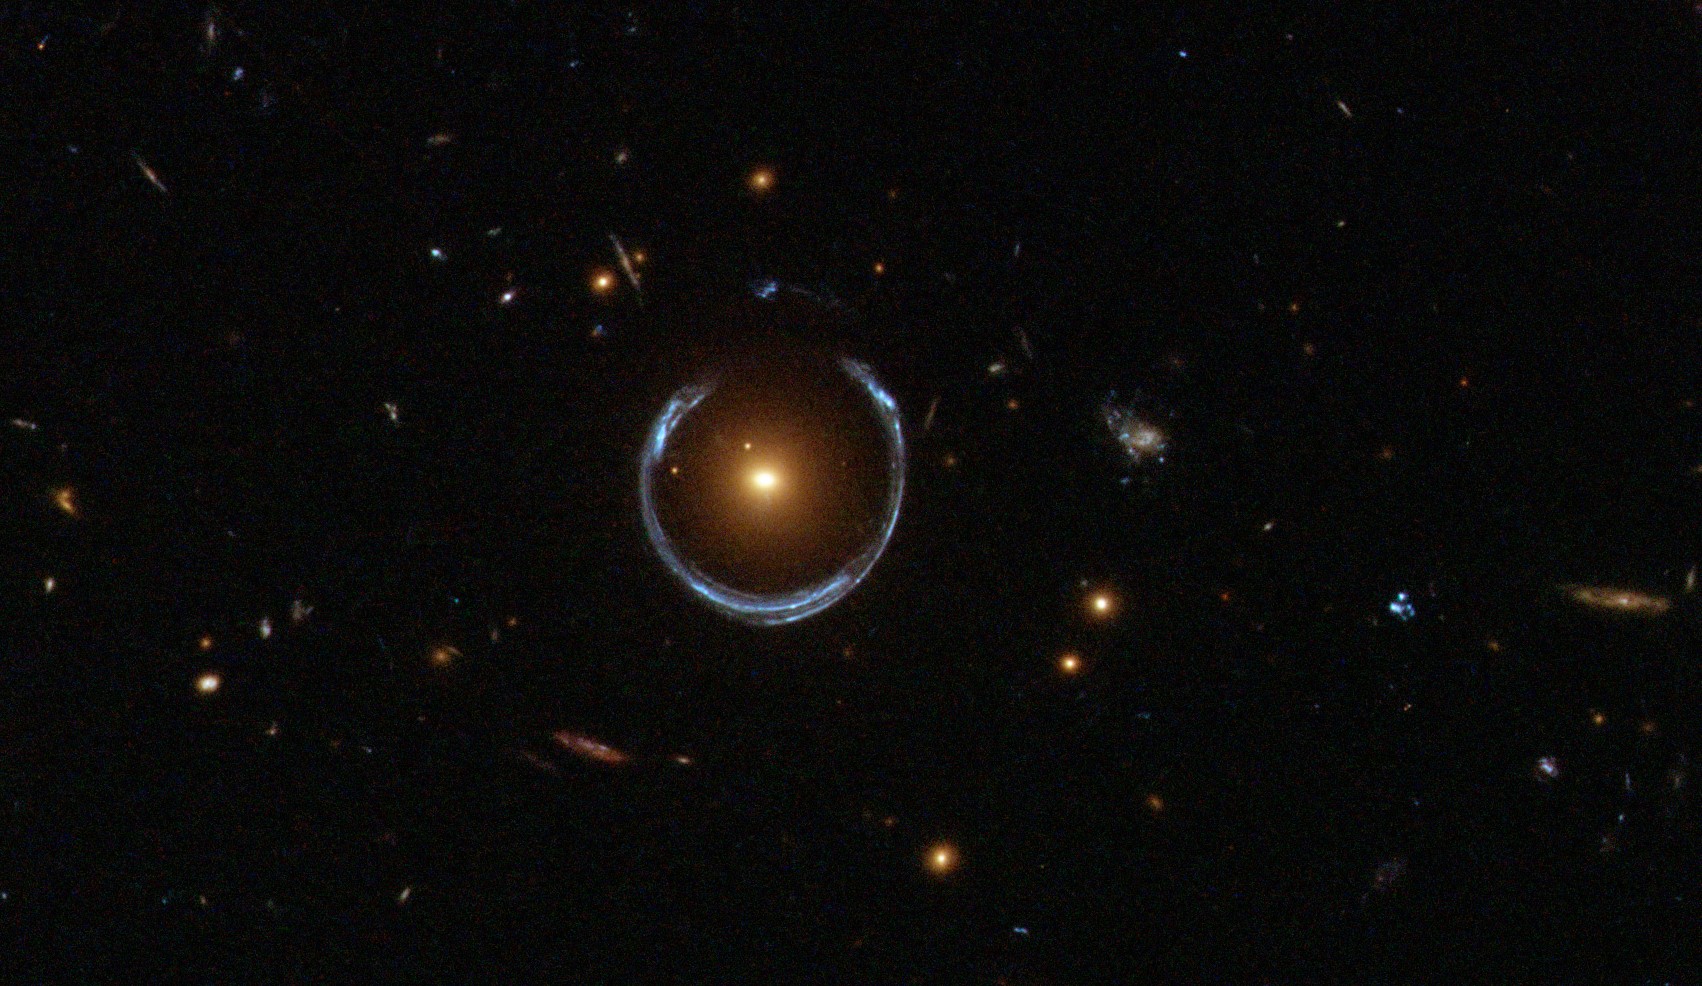 Black background dotted with galaxies. A reddish galaxy at image center with a bluish-white ring curving almost completely around it.